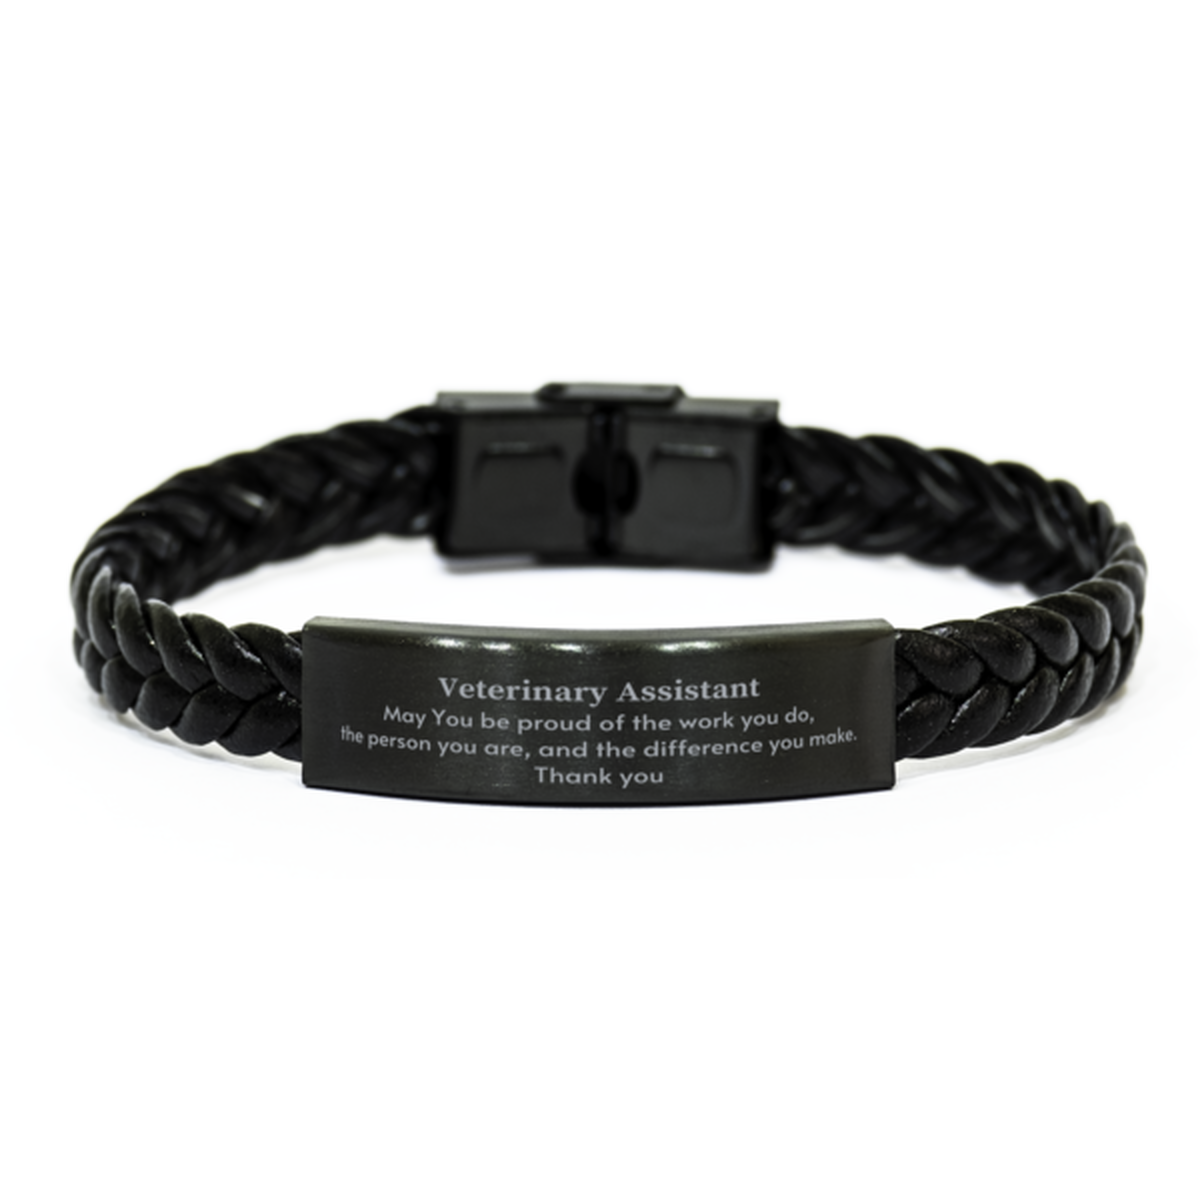 Heartwarming Braided Leather Bracelet Retirement Coworkers Gifts for Veterinary Assistant, Veterinary Assistant May You be proud of the work you do, the person you are Gifts for Boss Men Women Friends